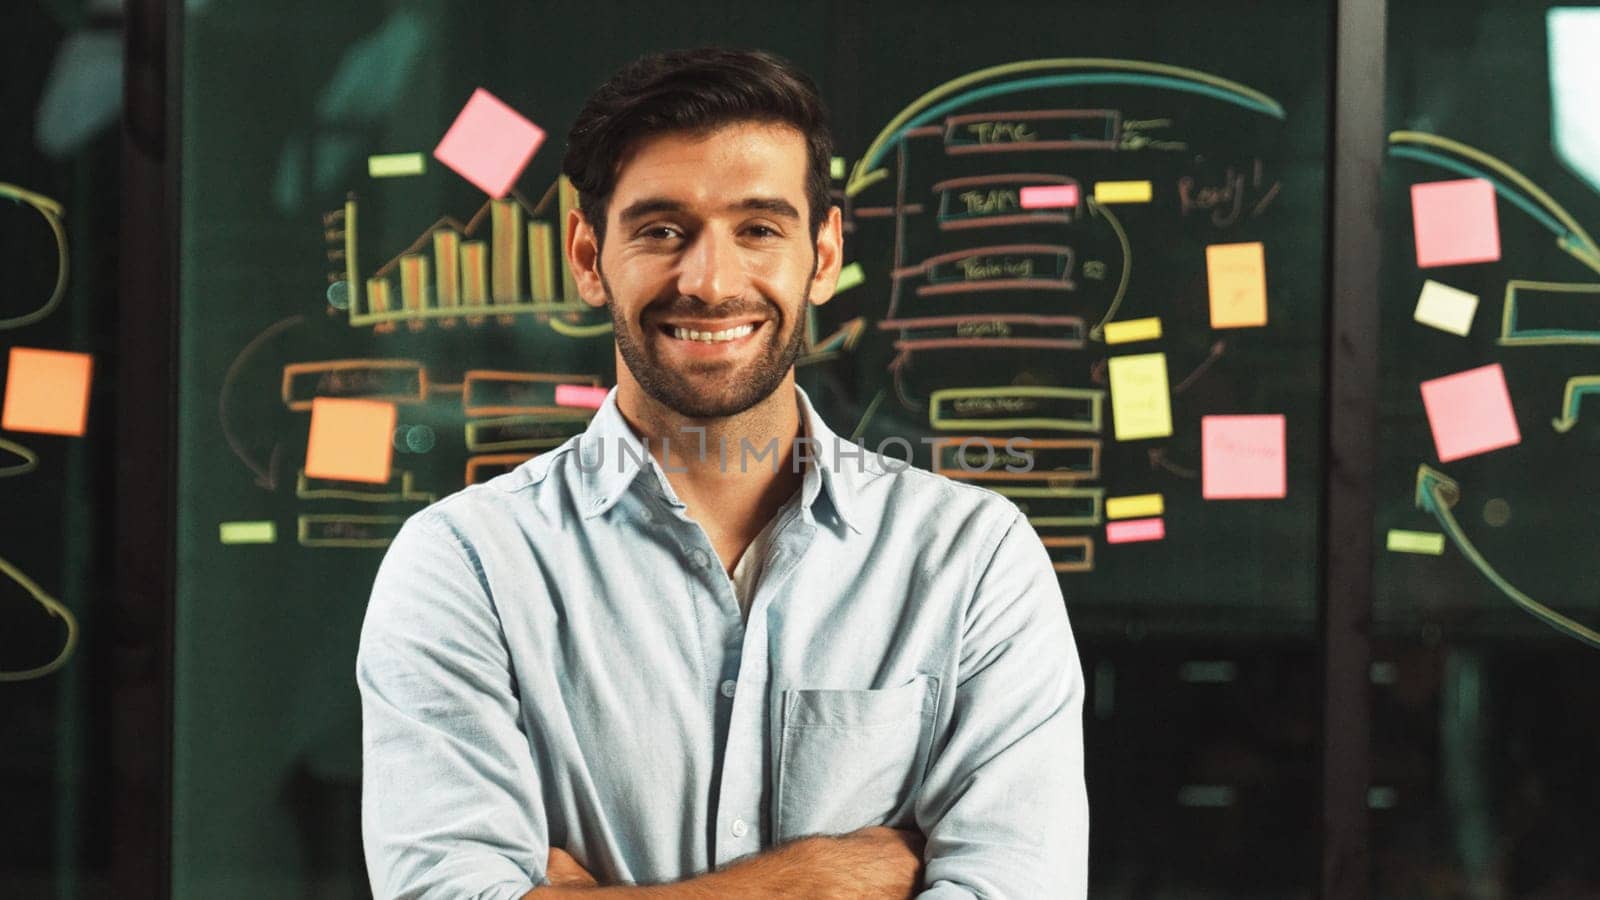 Professional businessman looking at camera while standing with folded arms on glass wall with statistic and sticky notes. Male leader crossing arms while smiling at camera with confident. Tracery